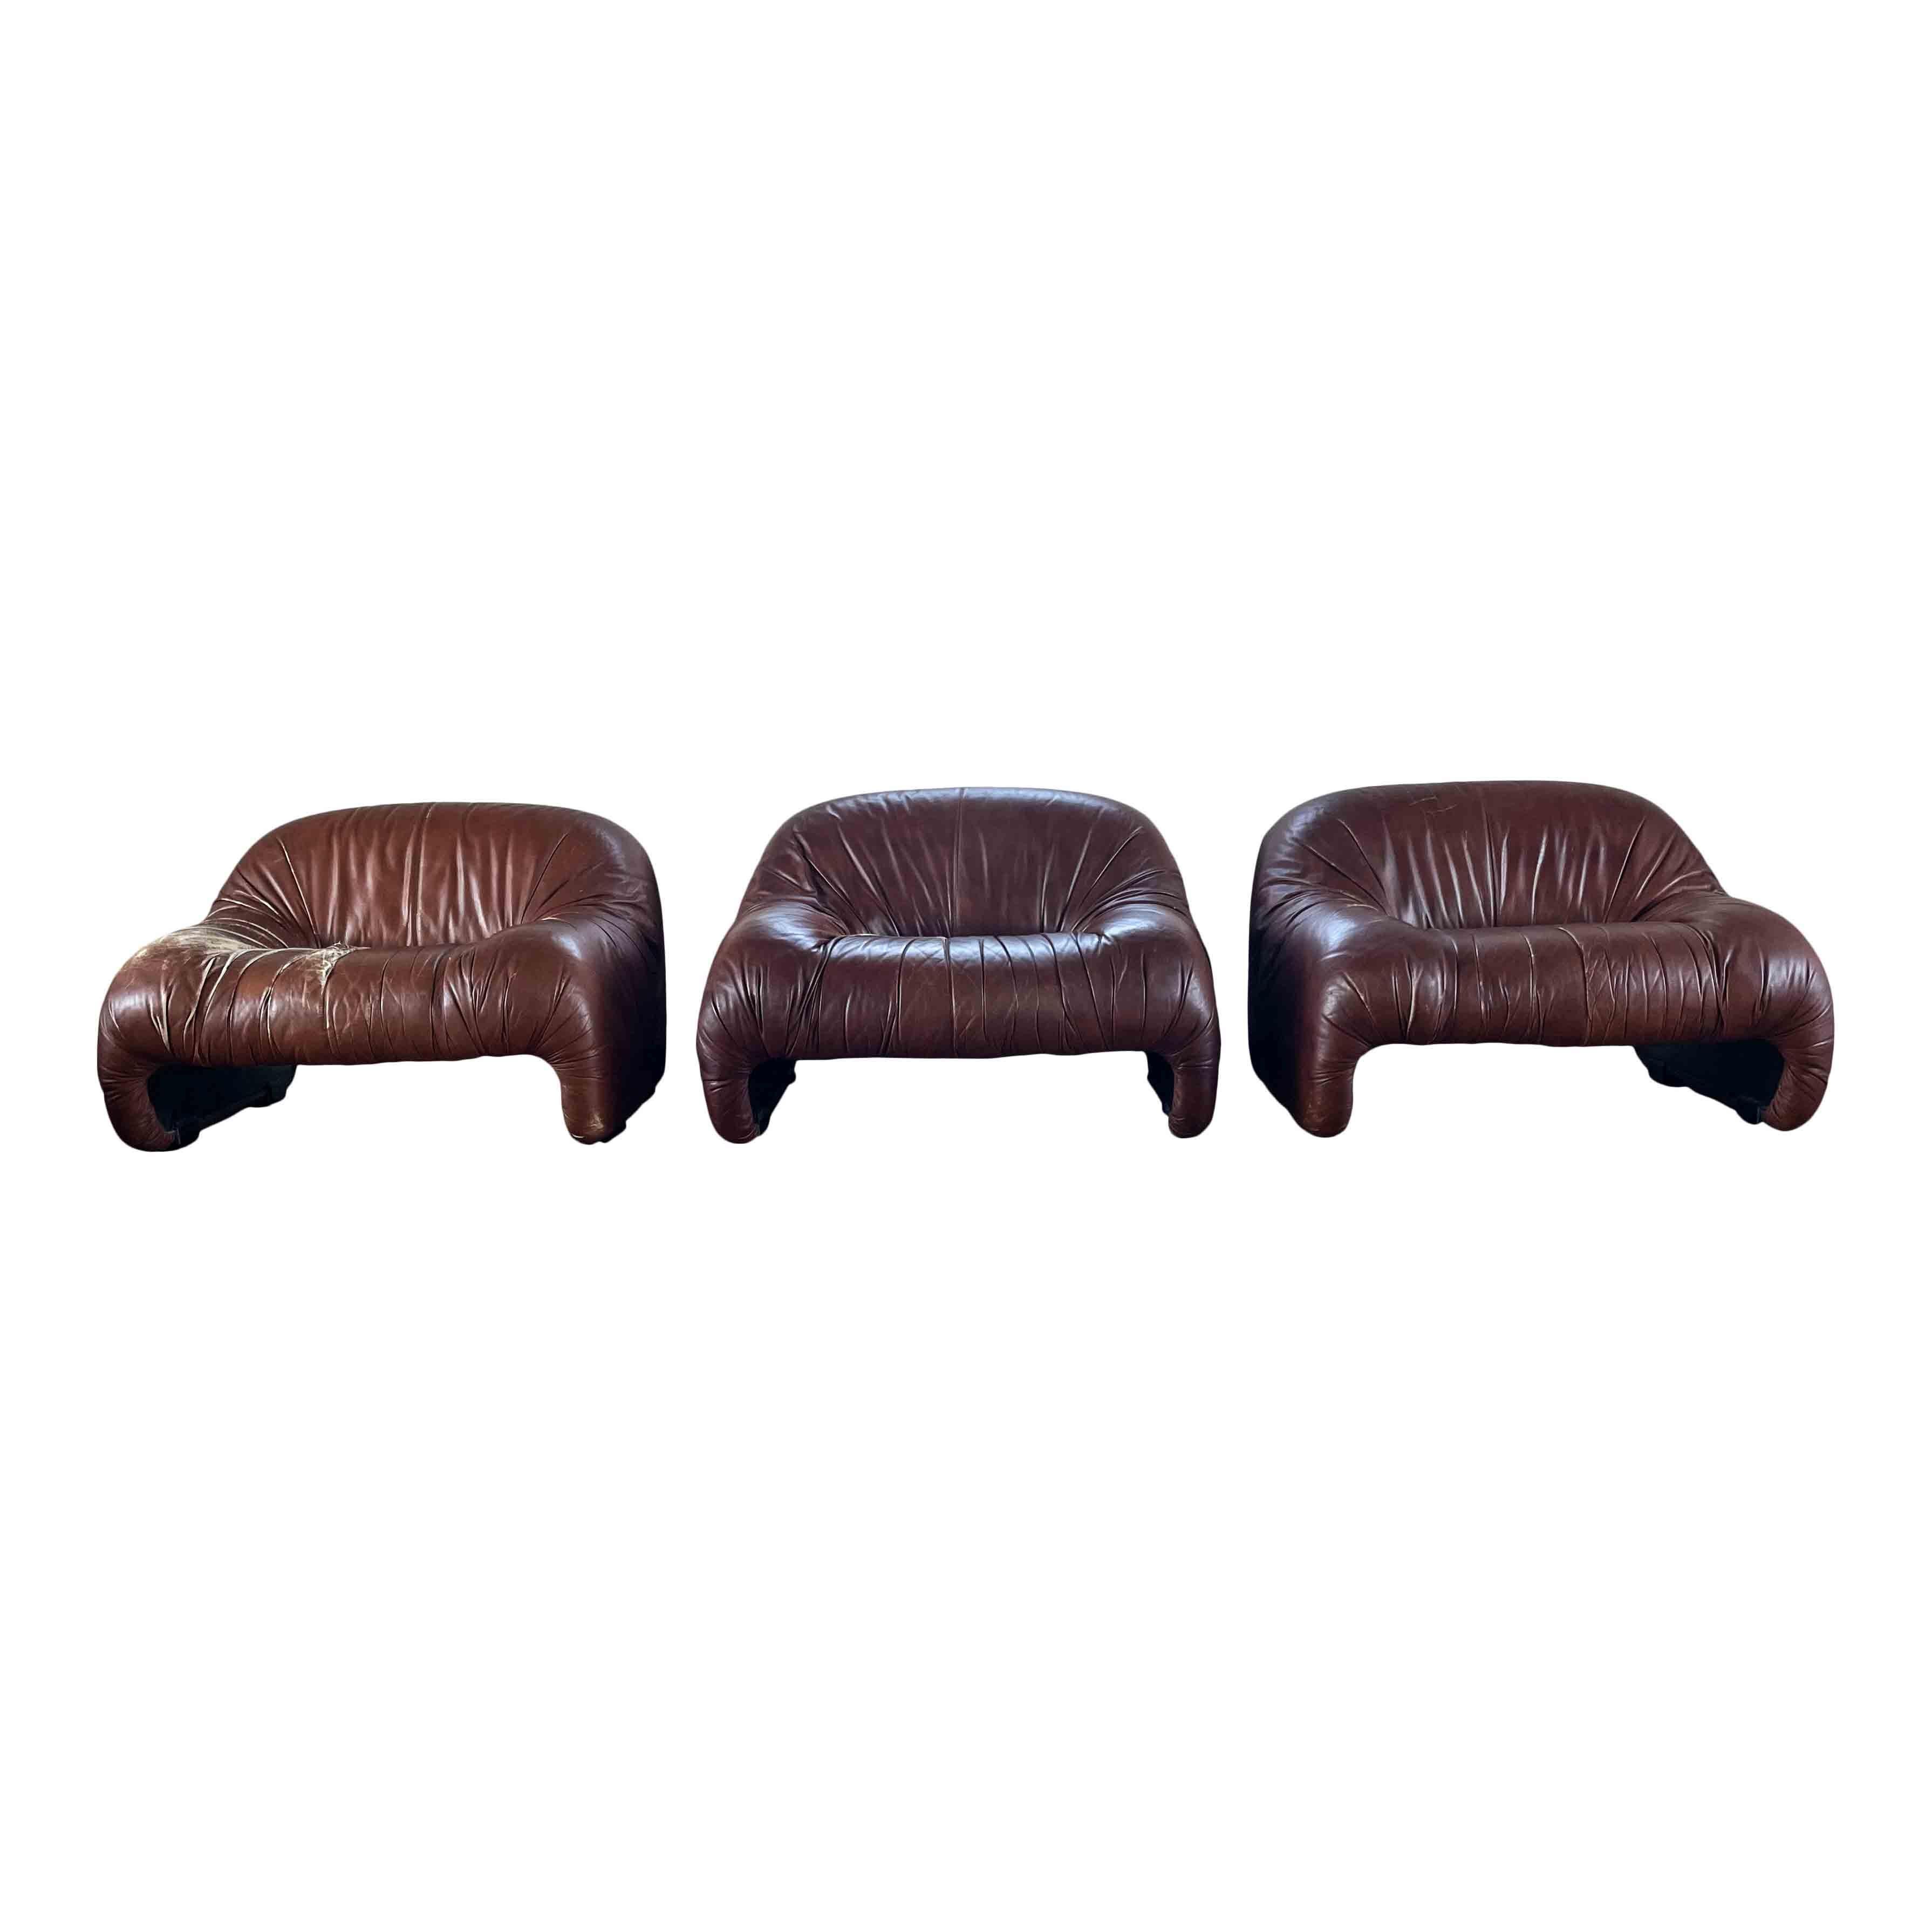 Set composed of three Bonanza lounge chairs, designed by Afra and Tobia Scarpa and produced by the Italian manufacturer C&B Italia (now B&B Italia), in 1970.

The set features a chocolate brown leather upholstery, foam padding, and plastic